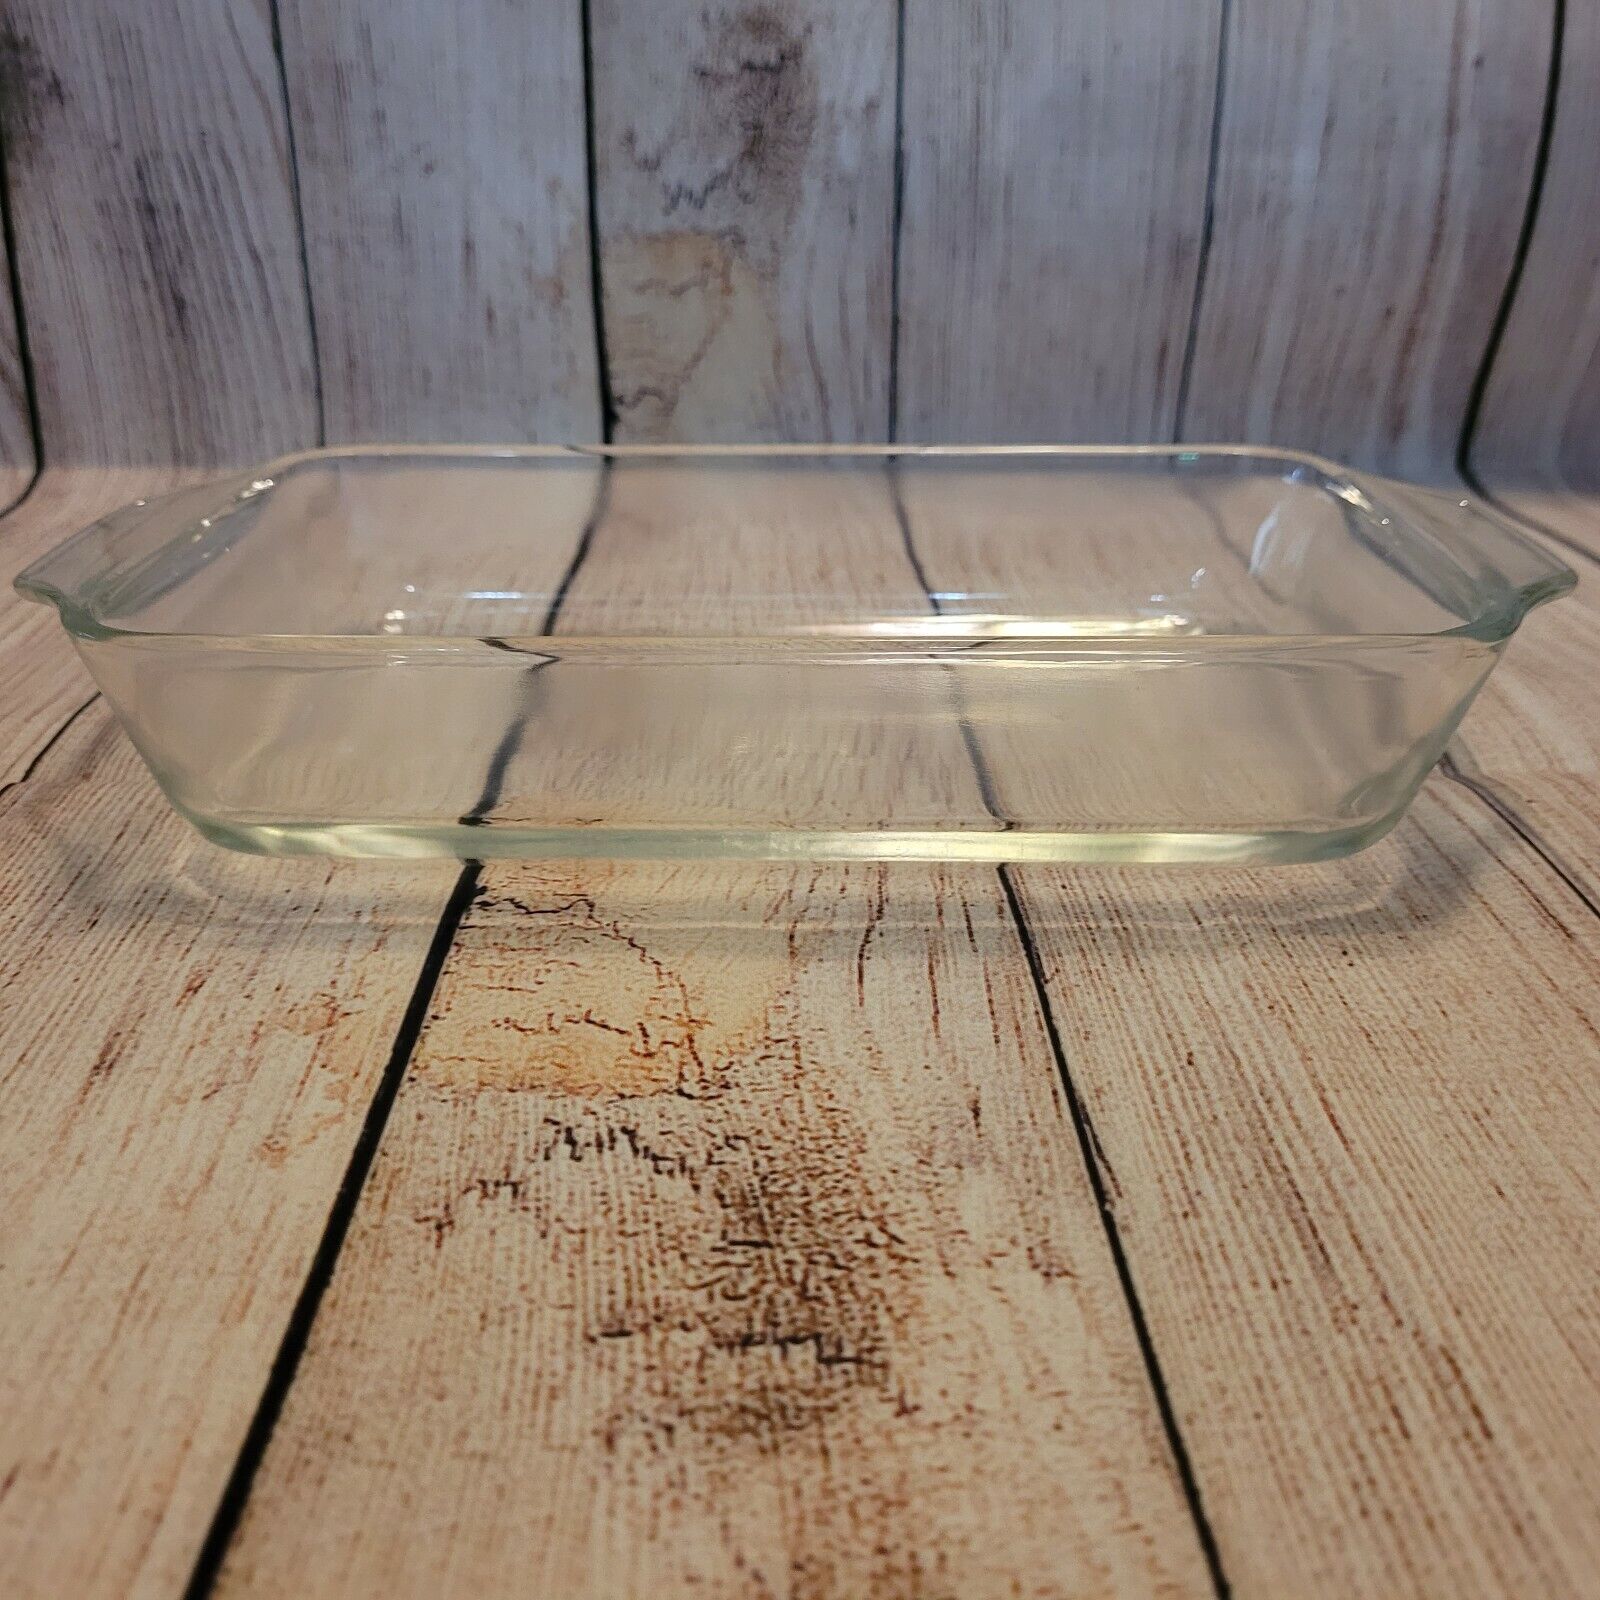 Vintage Anchor Hocking Clear Glass 427 Baking Dish 8 1/2” x 5” x